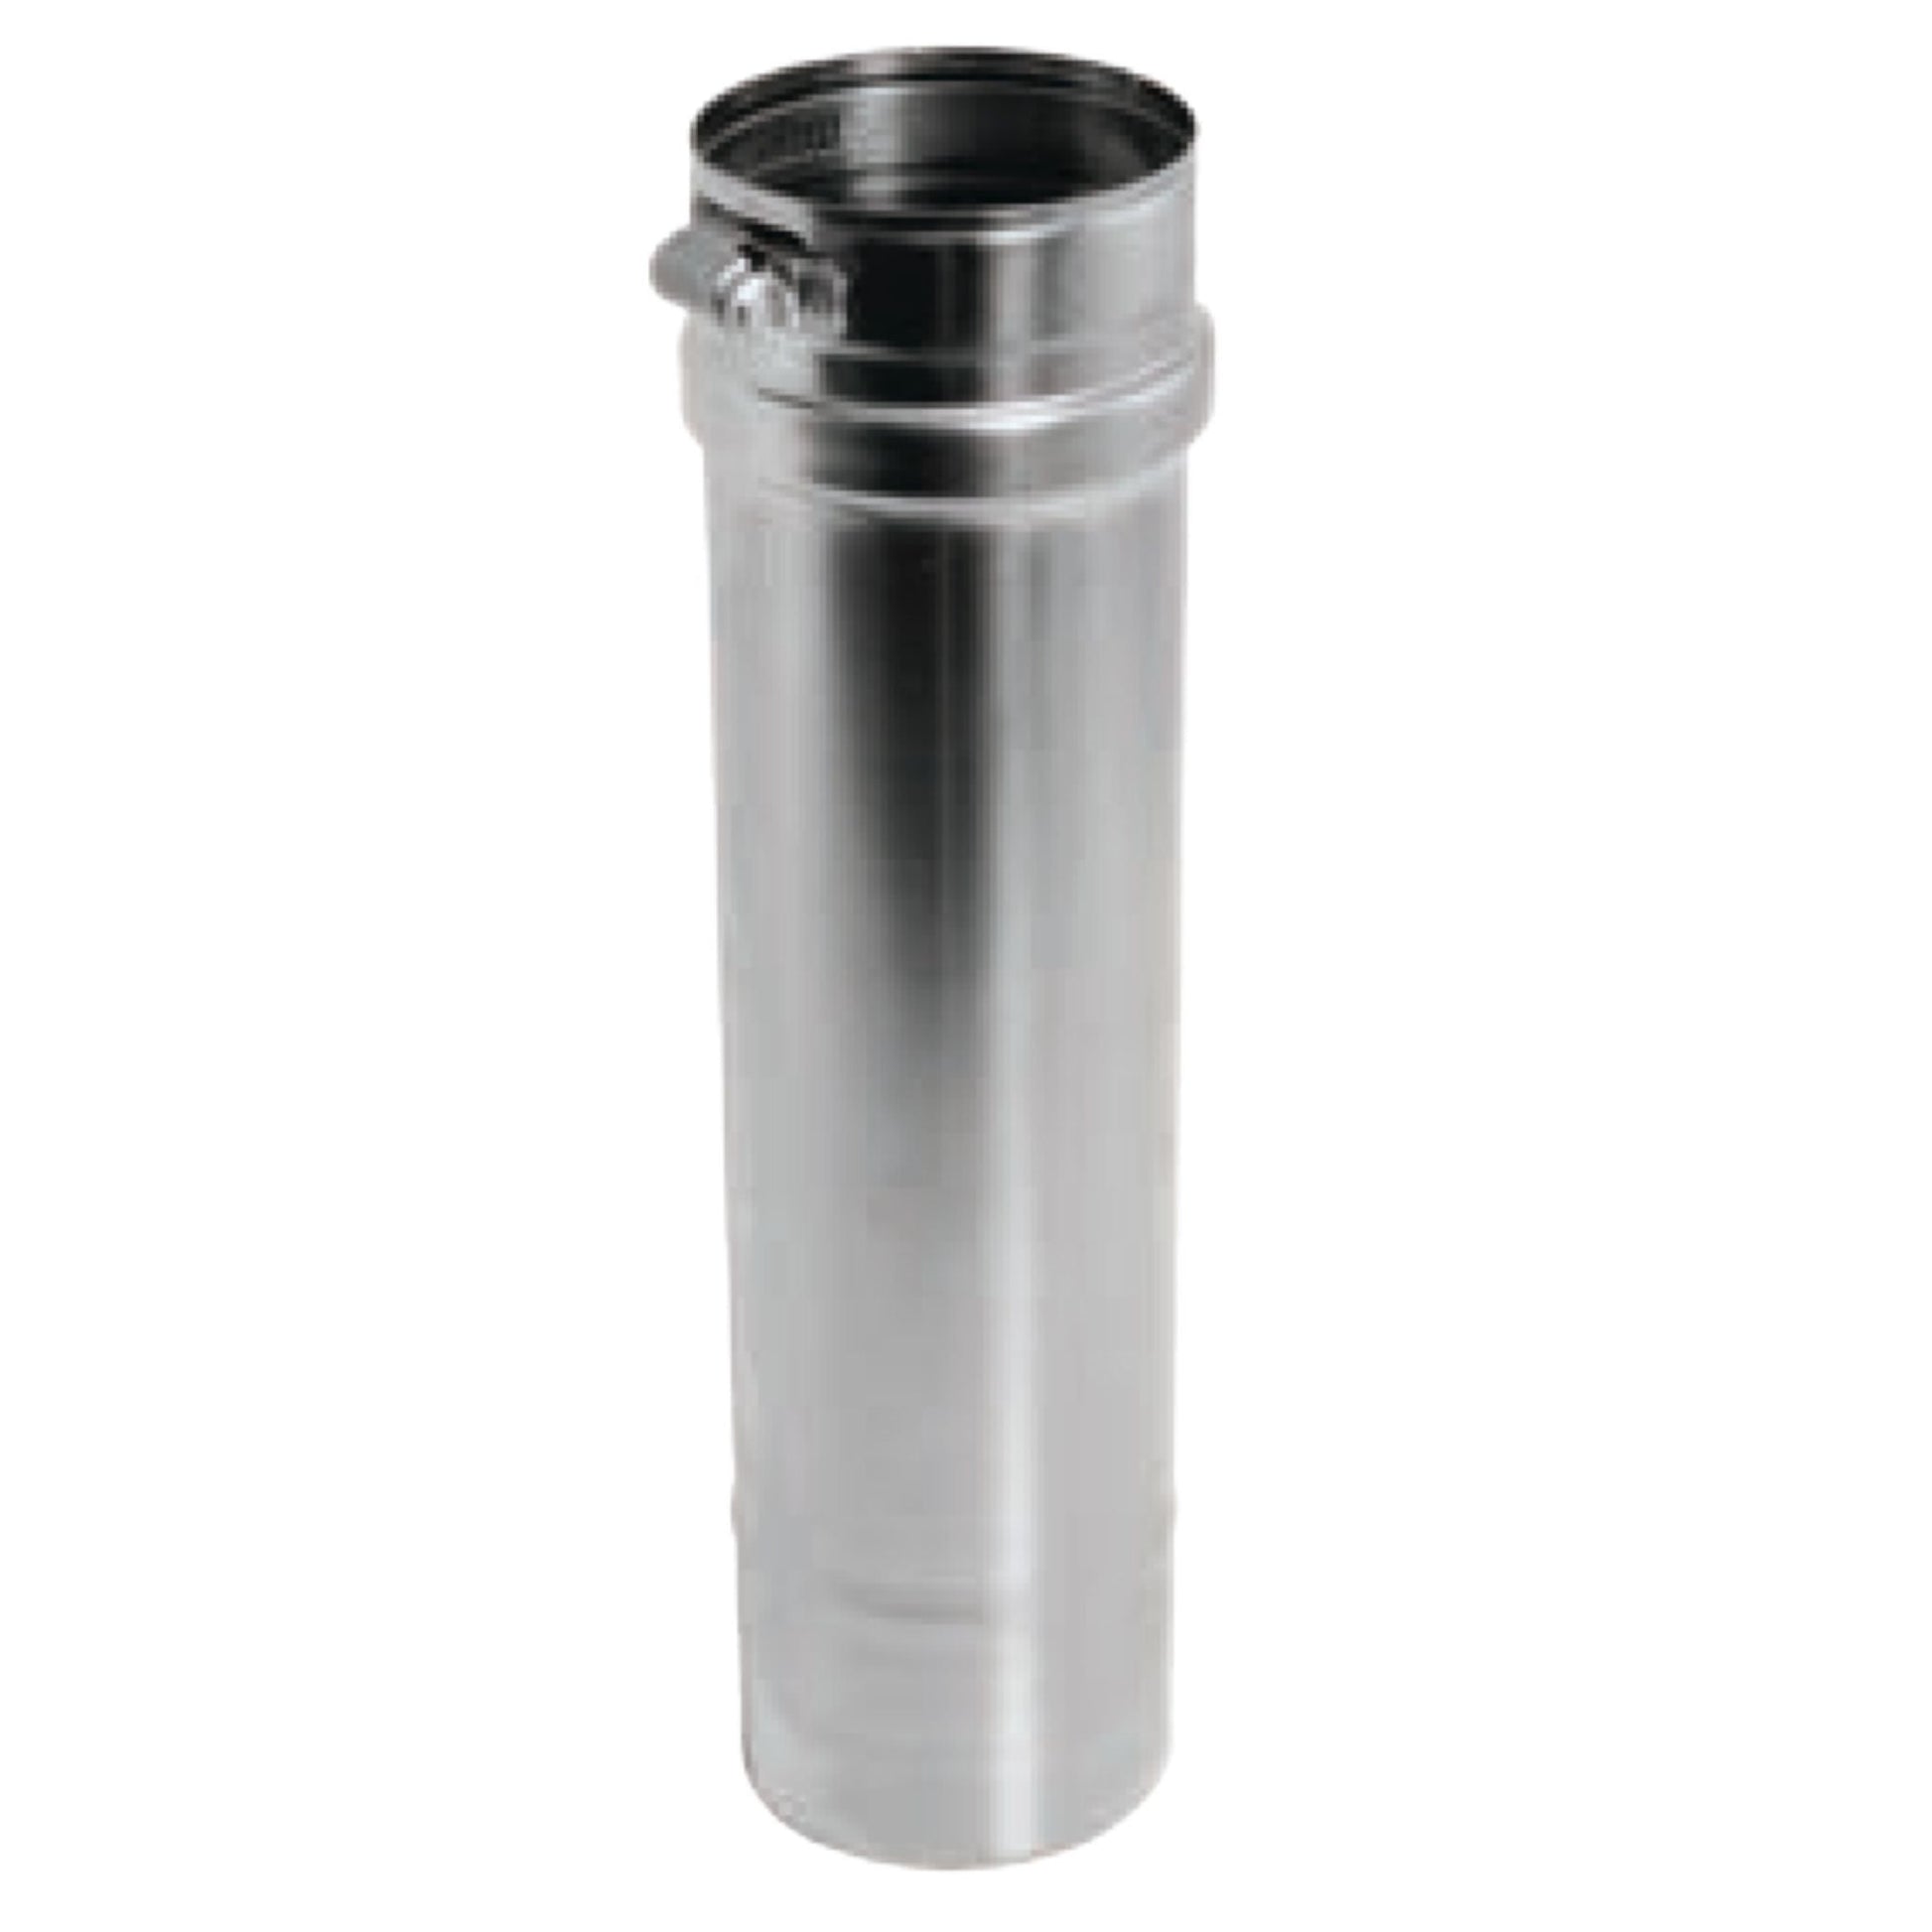 DuraVent FasNSeal 5" x 48" 316L Stainless Steel Vent Length